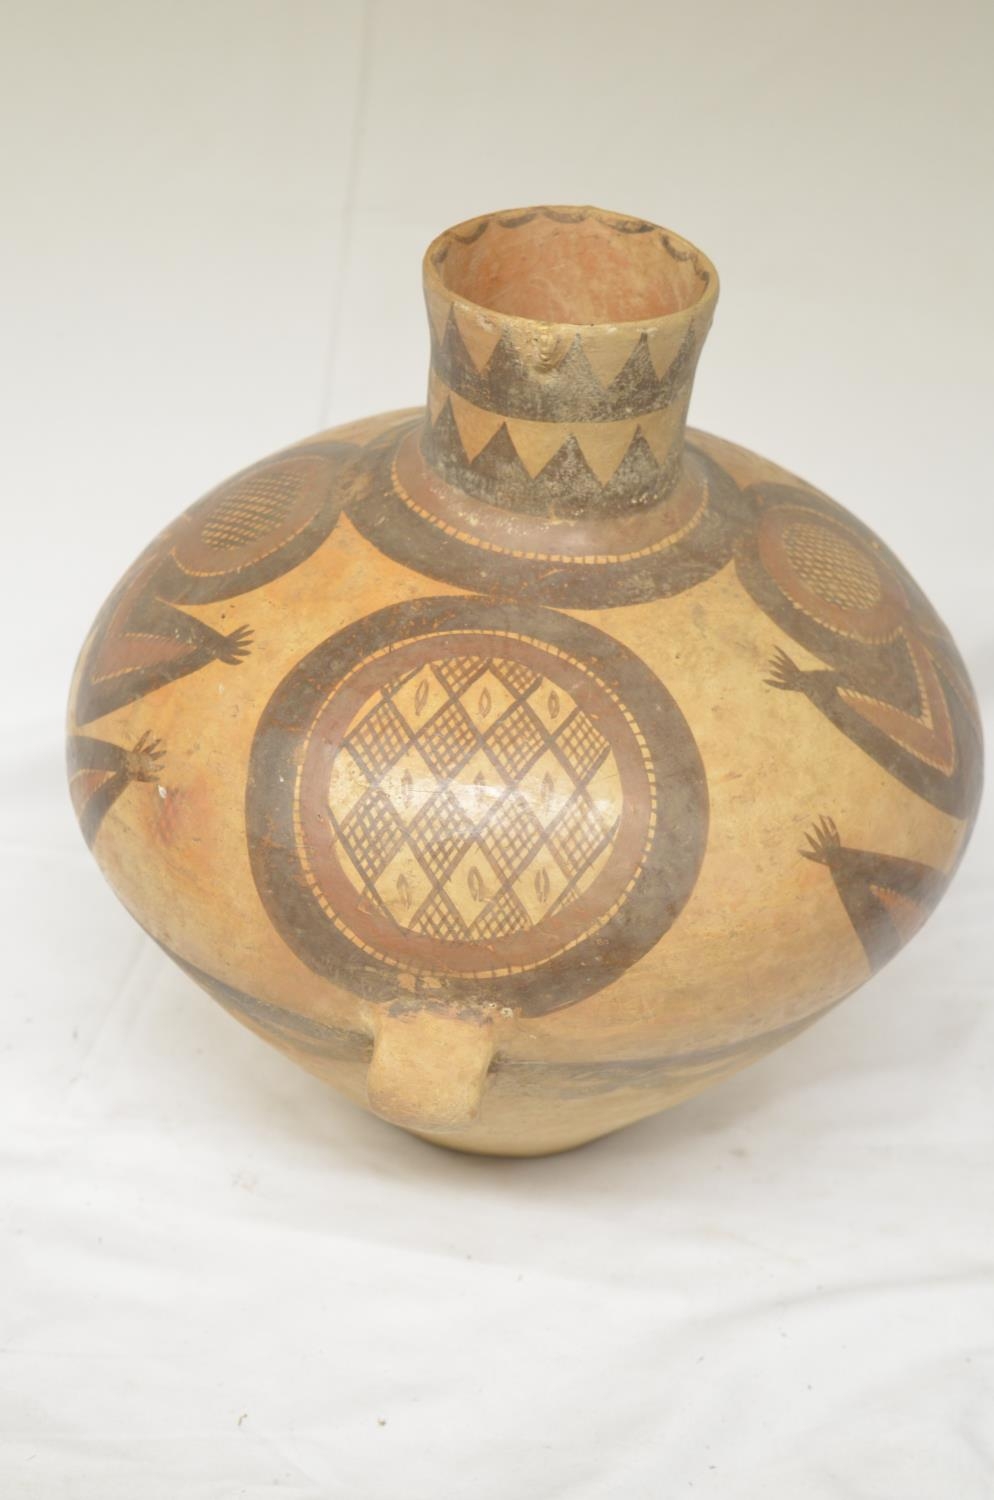 Antiquity, large terracotta clay pot, origin unknown, likely Malaysian/Eastern. No cracking or - Image 2 of 2